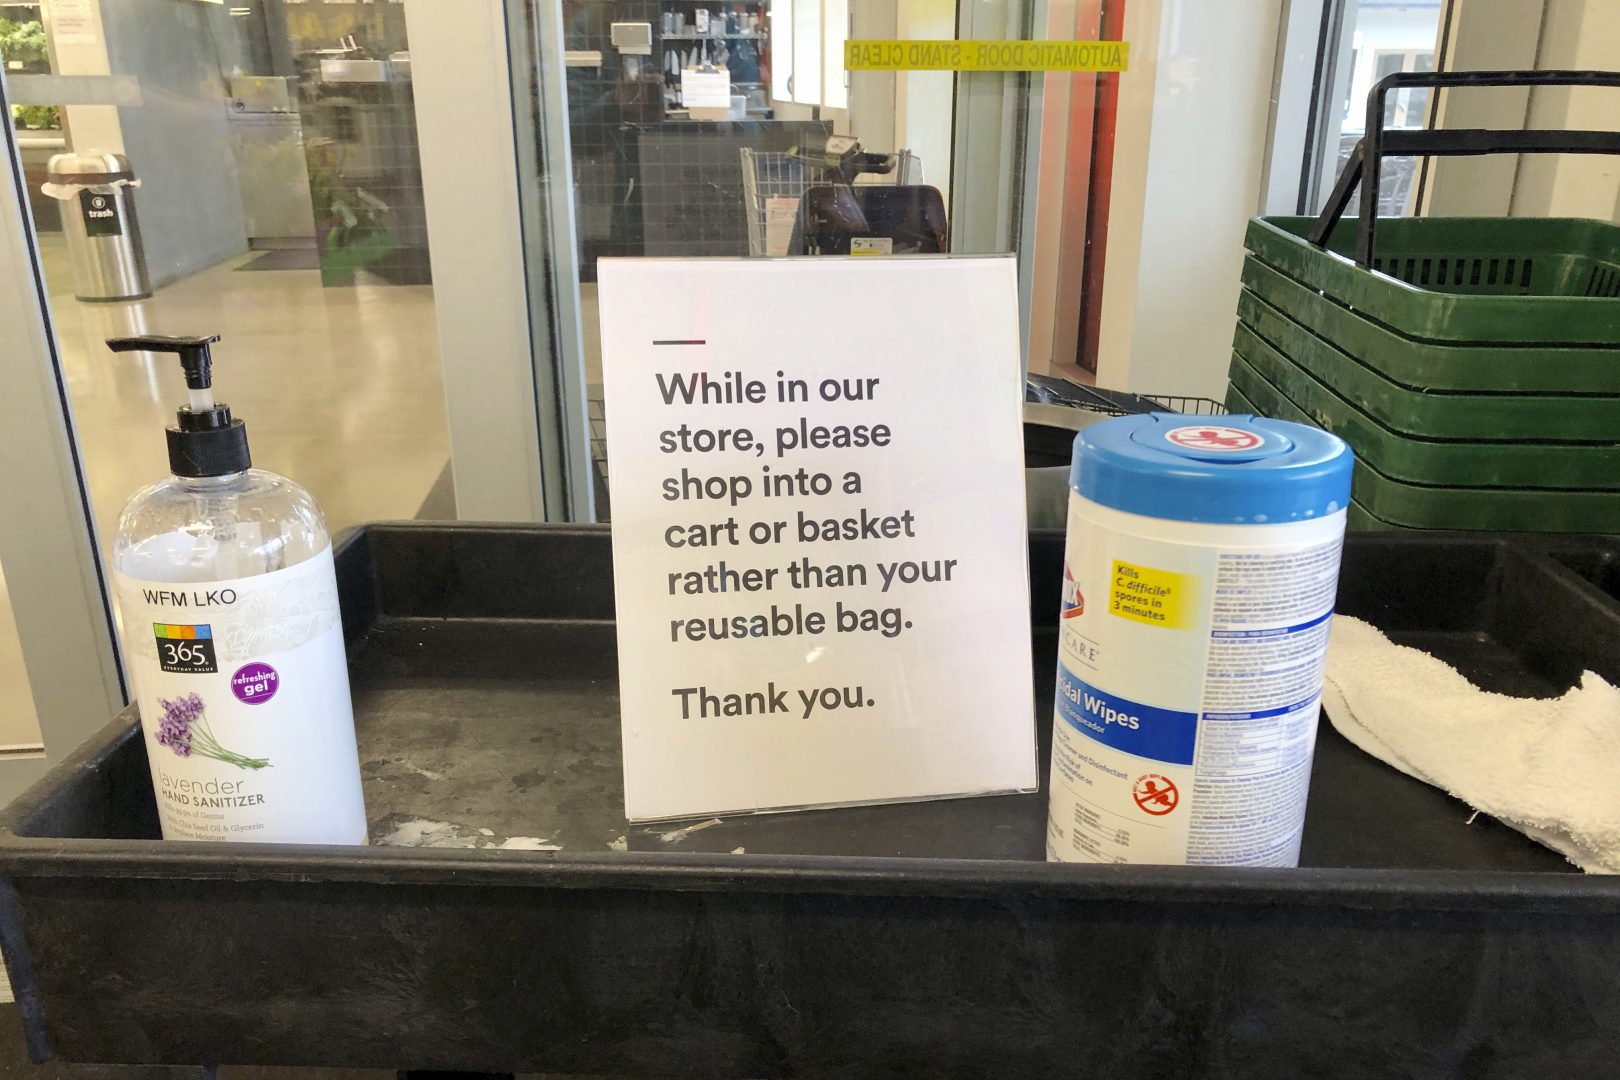 In this Sunday, March 29, 2020, photo, a sign posted at an entrance to a 365 Whole Foods store advises customers not to use their own bags while shopping in Lake Oswego, Ore. Just weeks earlier, cities and even states across the U.S. were busy banning straws, limiting takeout containers and mandating that shoppers bring reusable bags or pay a small fee. Grocery clerks became nervous that the virus could linger on reusable fabric bags, and their unions backed them up with demands to end plastic bag fees and suspend bag bans. The plastics industry seized the moment, lobbying to overturn existing bans on single-use plastics.  